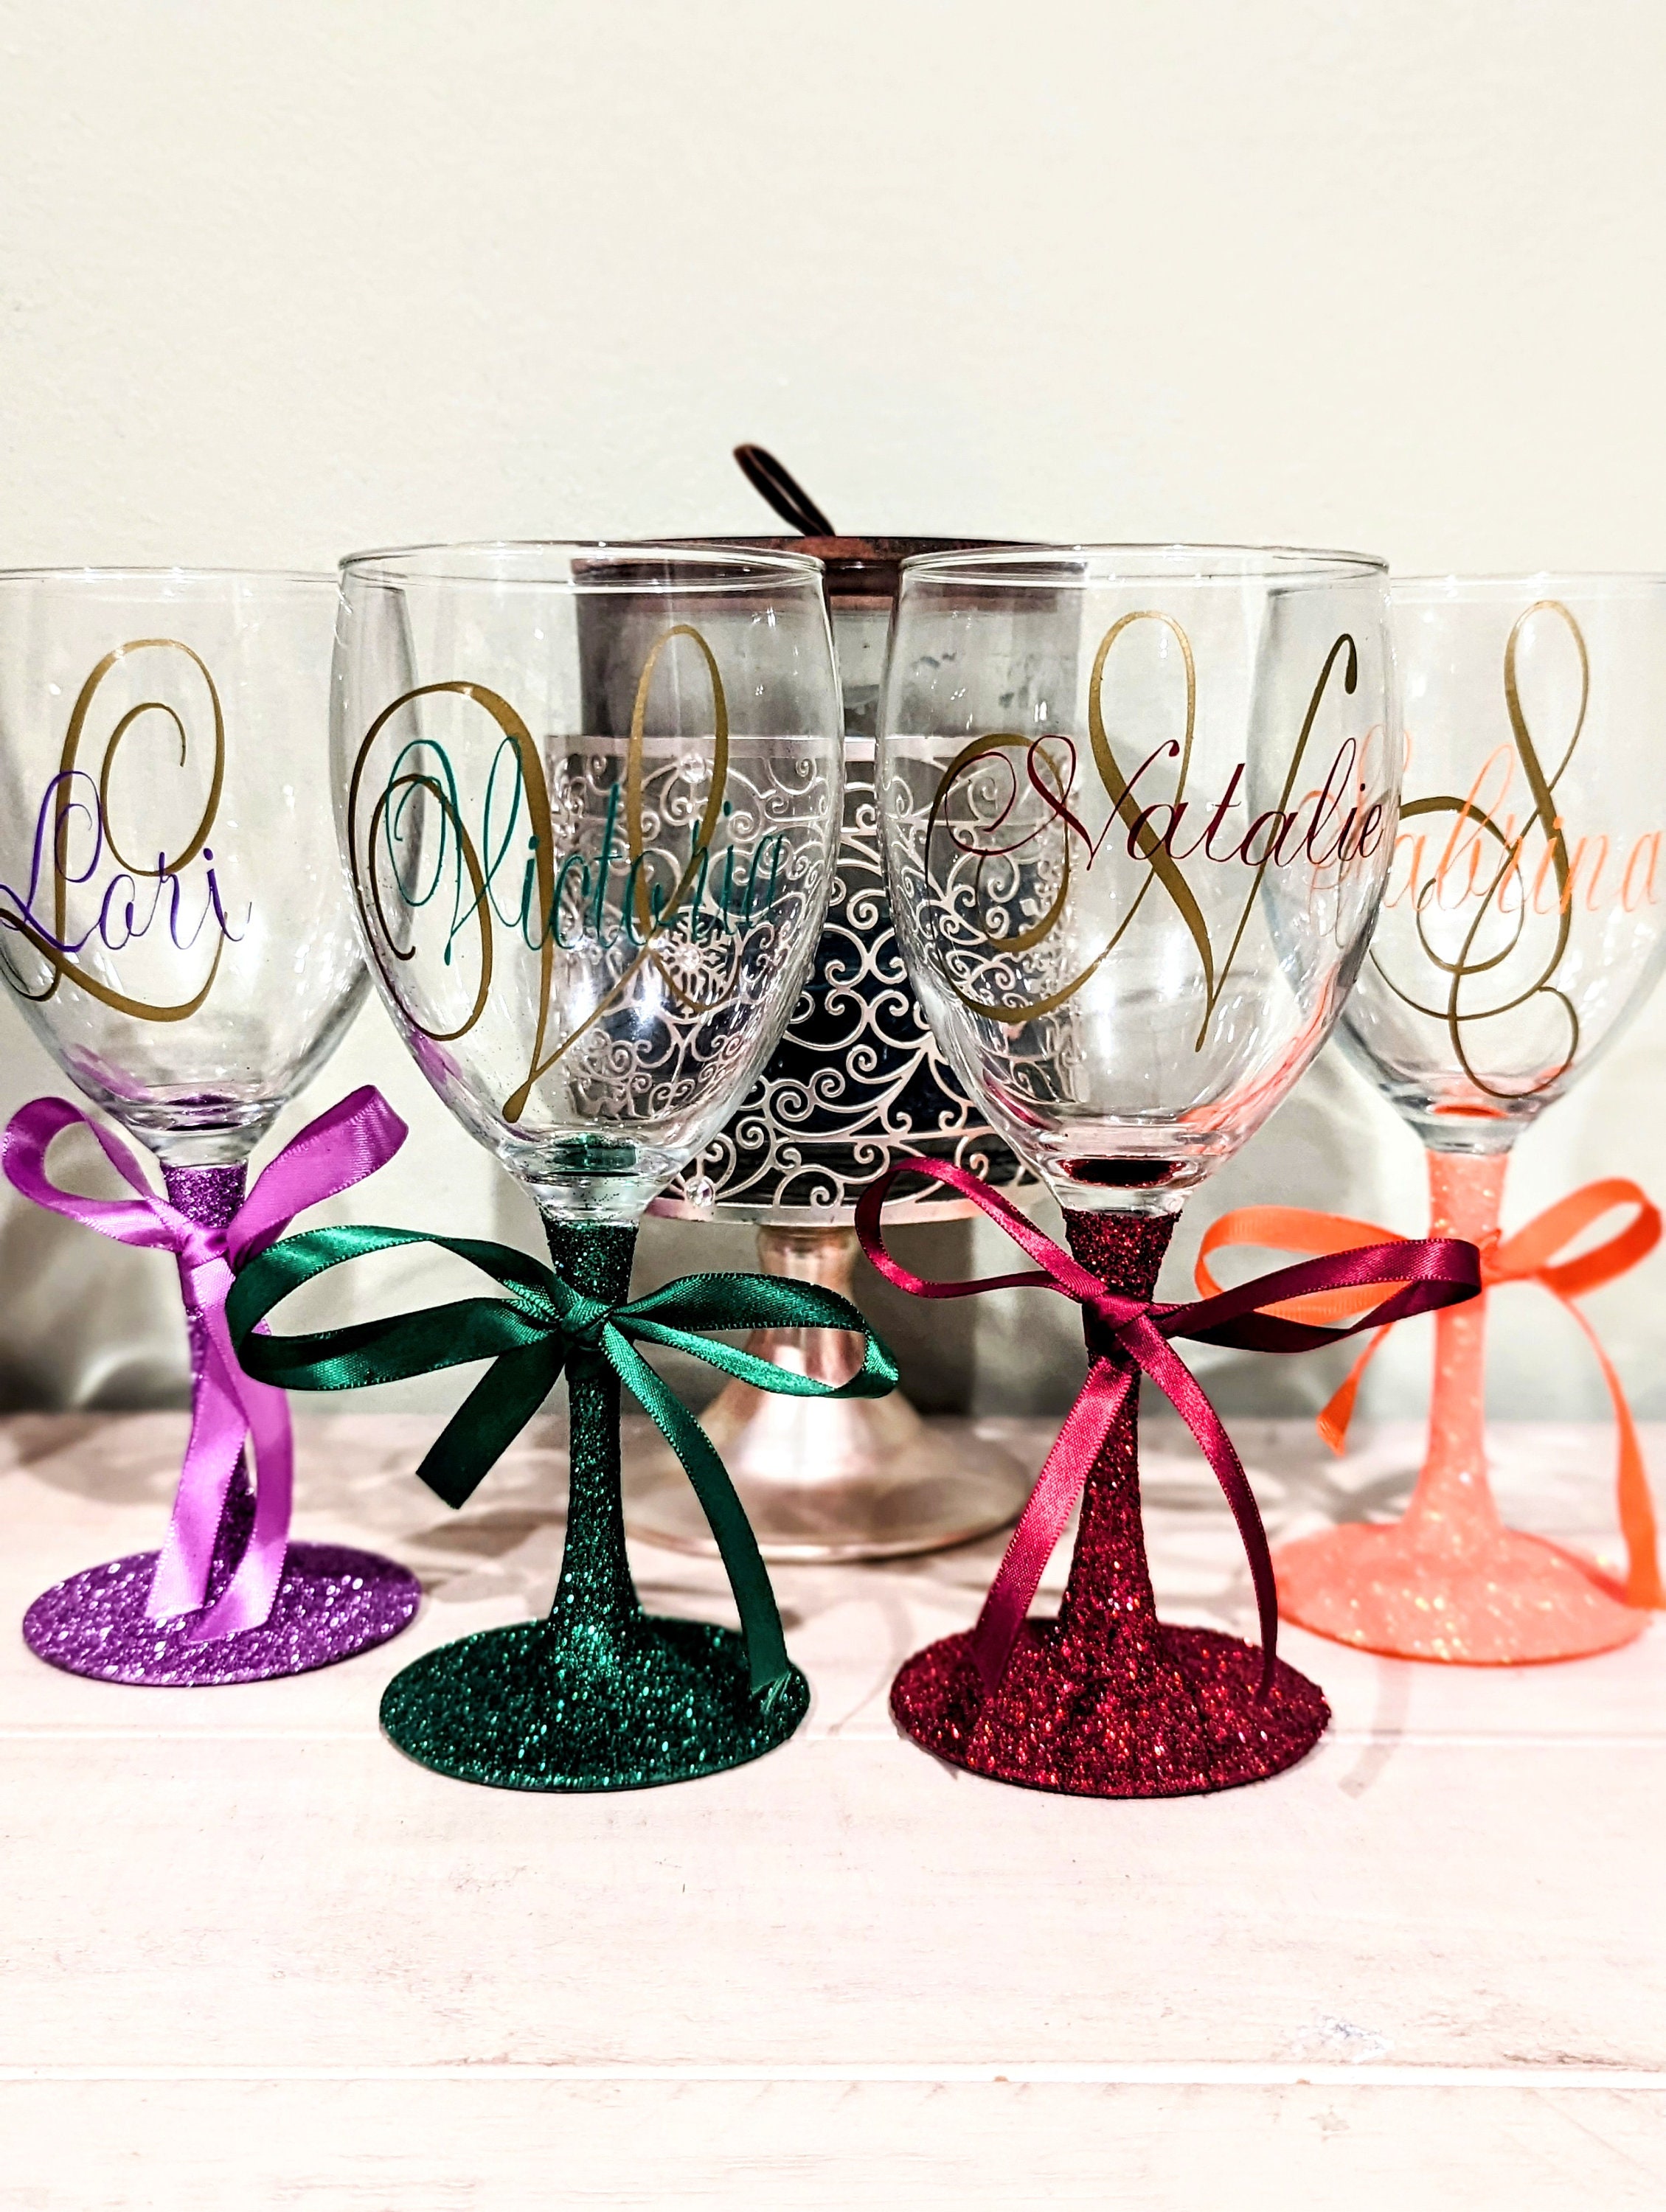 Cute Personalized Wine Glasses for 2 w/glitter bottom. Initial on the front  w/short saying on the back. Choose your colors. Great Gift Idea!